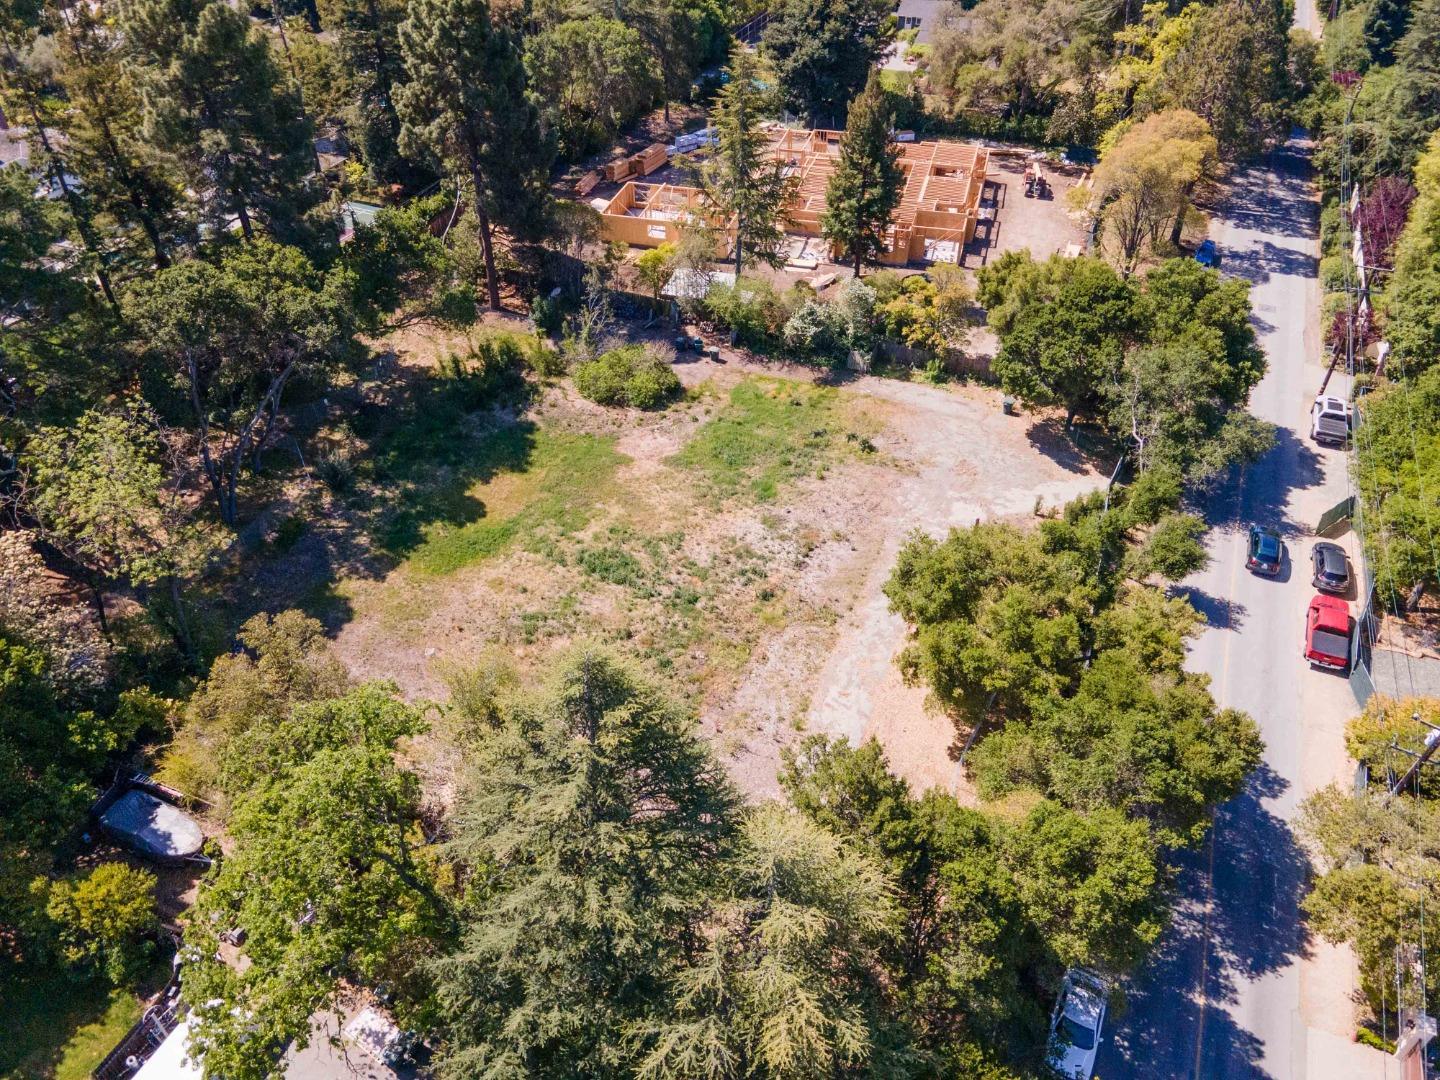 Build your dream estate over 10000 SF in West Atherton on this completely leveled lot. Nestled among gorgeous homes with privacy & prestige. Convenient location close to Stanford University, VC centers on Sand Hill Rd & shoppings, Quick access to HWY 280, SV tech companies & SF, Property is gated with chain link fence and green mesh.